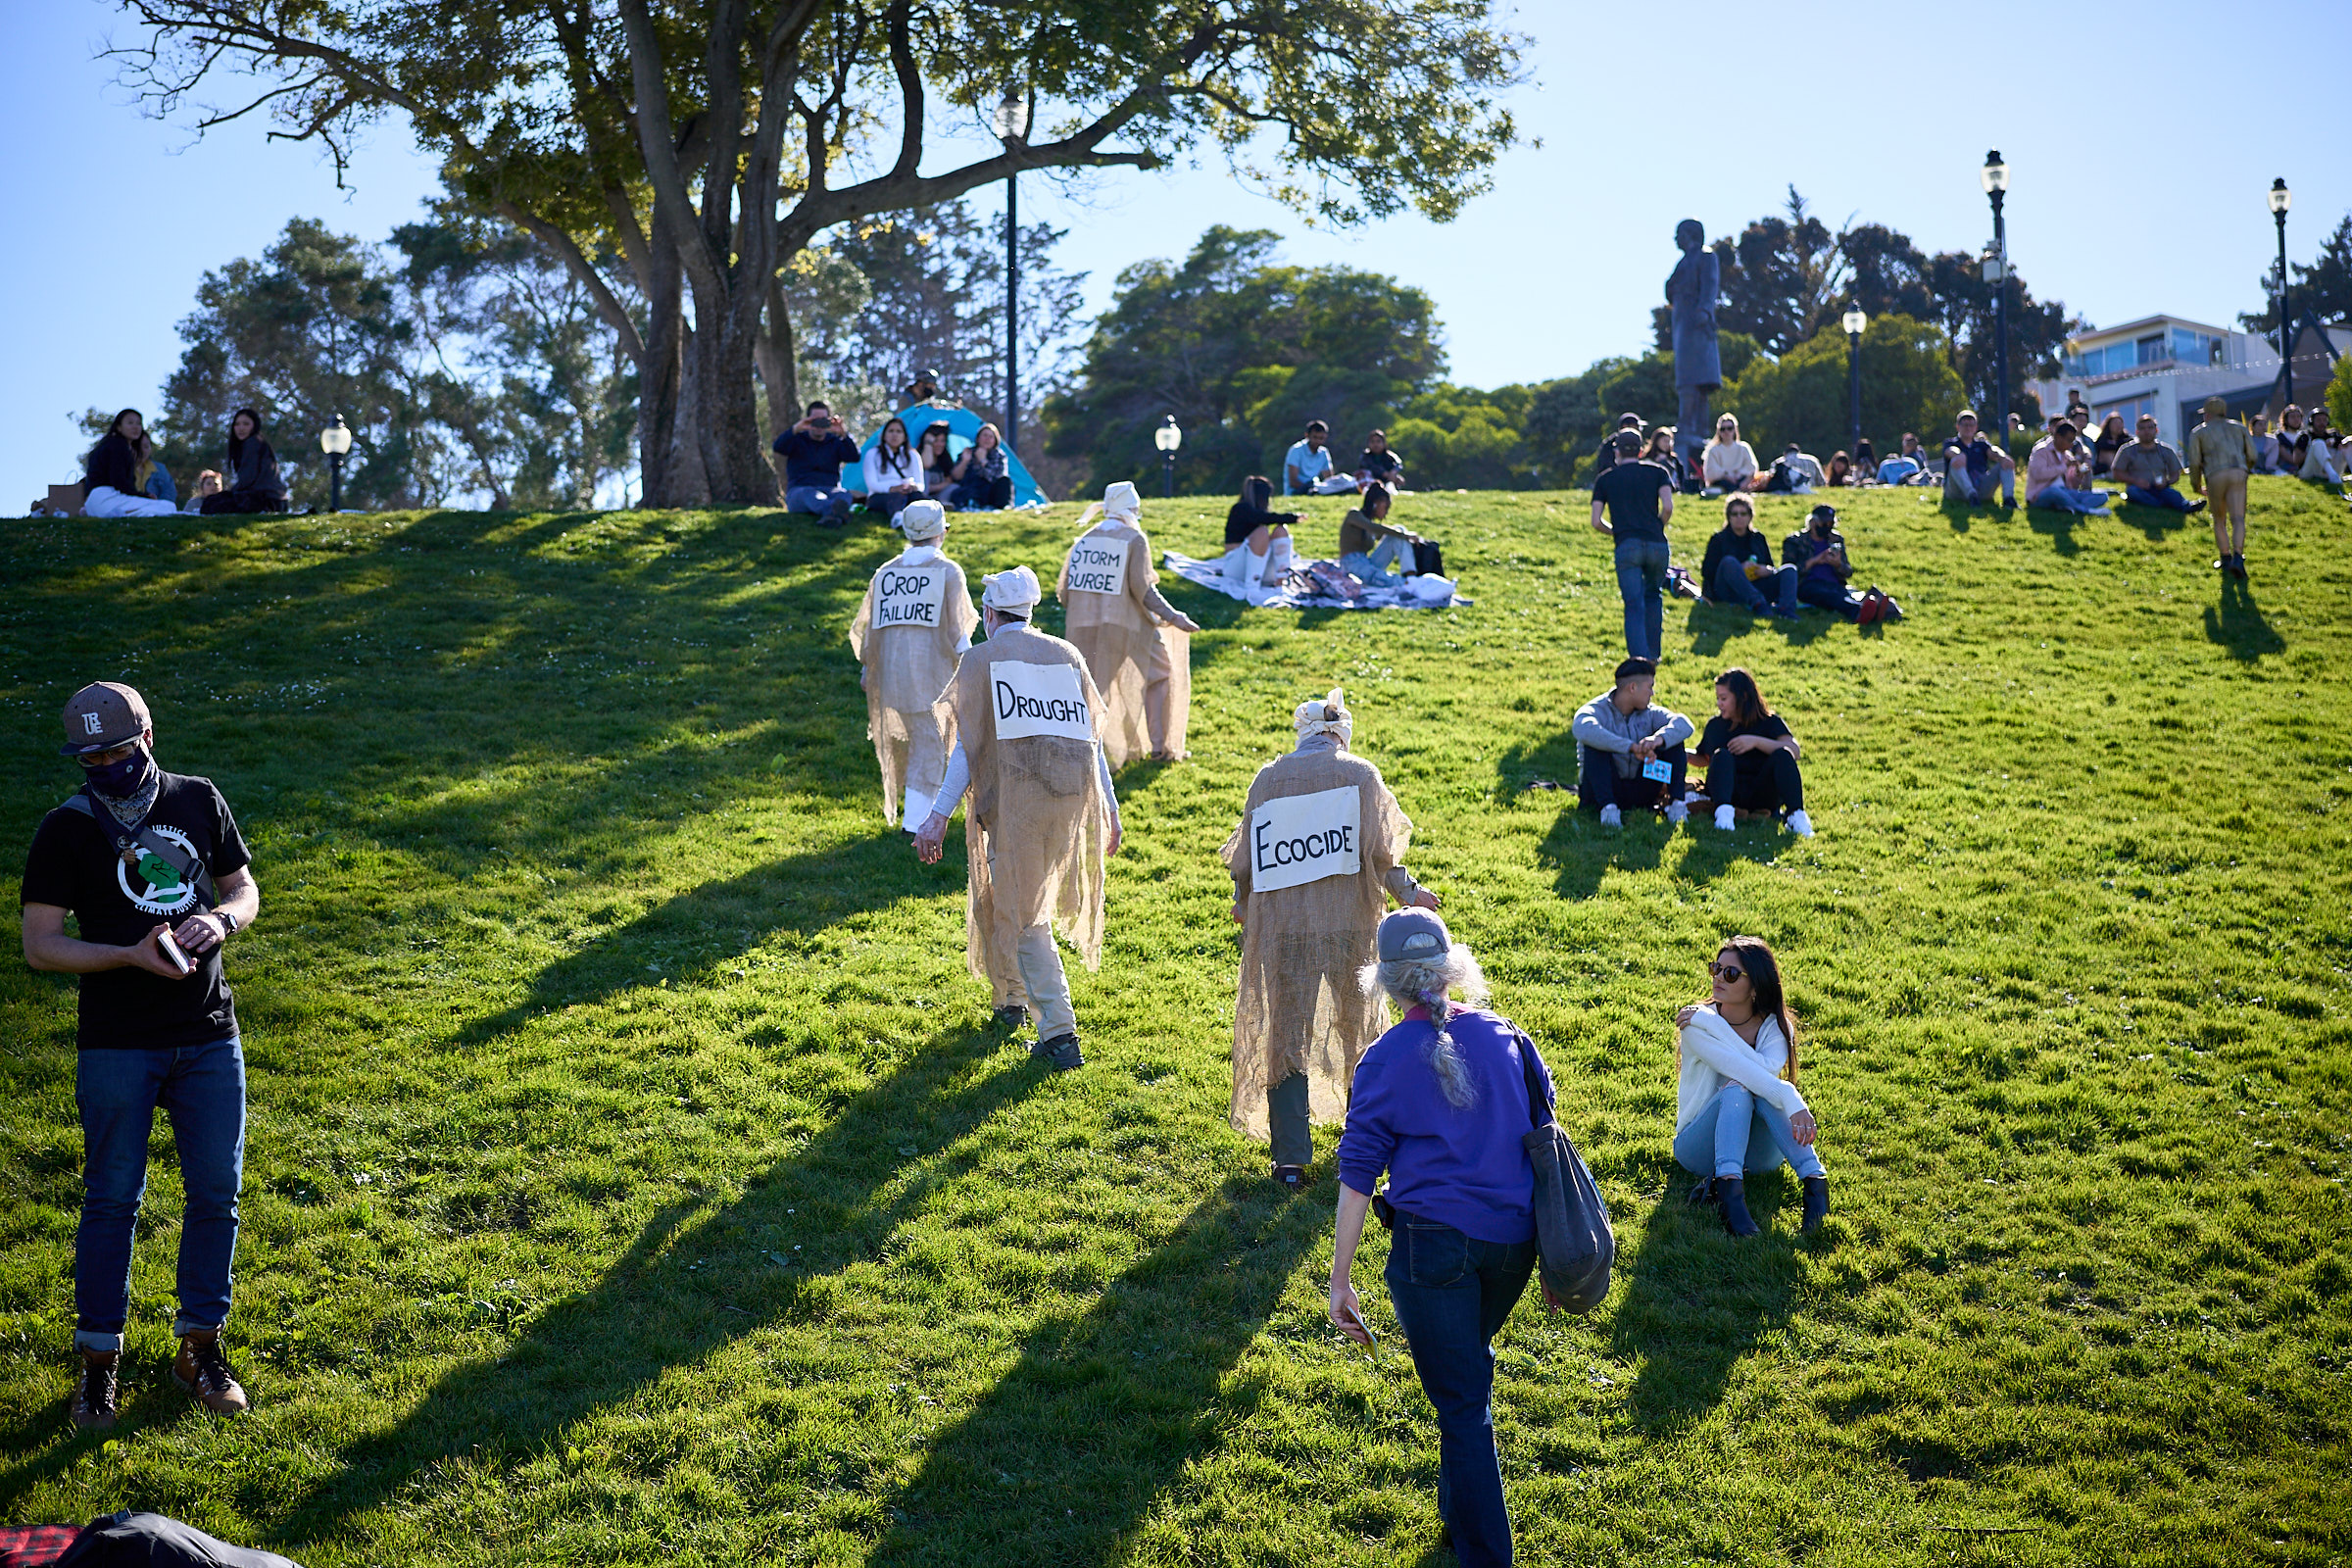 Lamentors dressed in burlap walk among park visitors, with the words "drought", "ecocide" and "crop failure" written on their backs. The green grass is bright from a sunny sky.